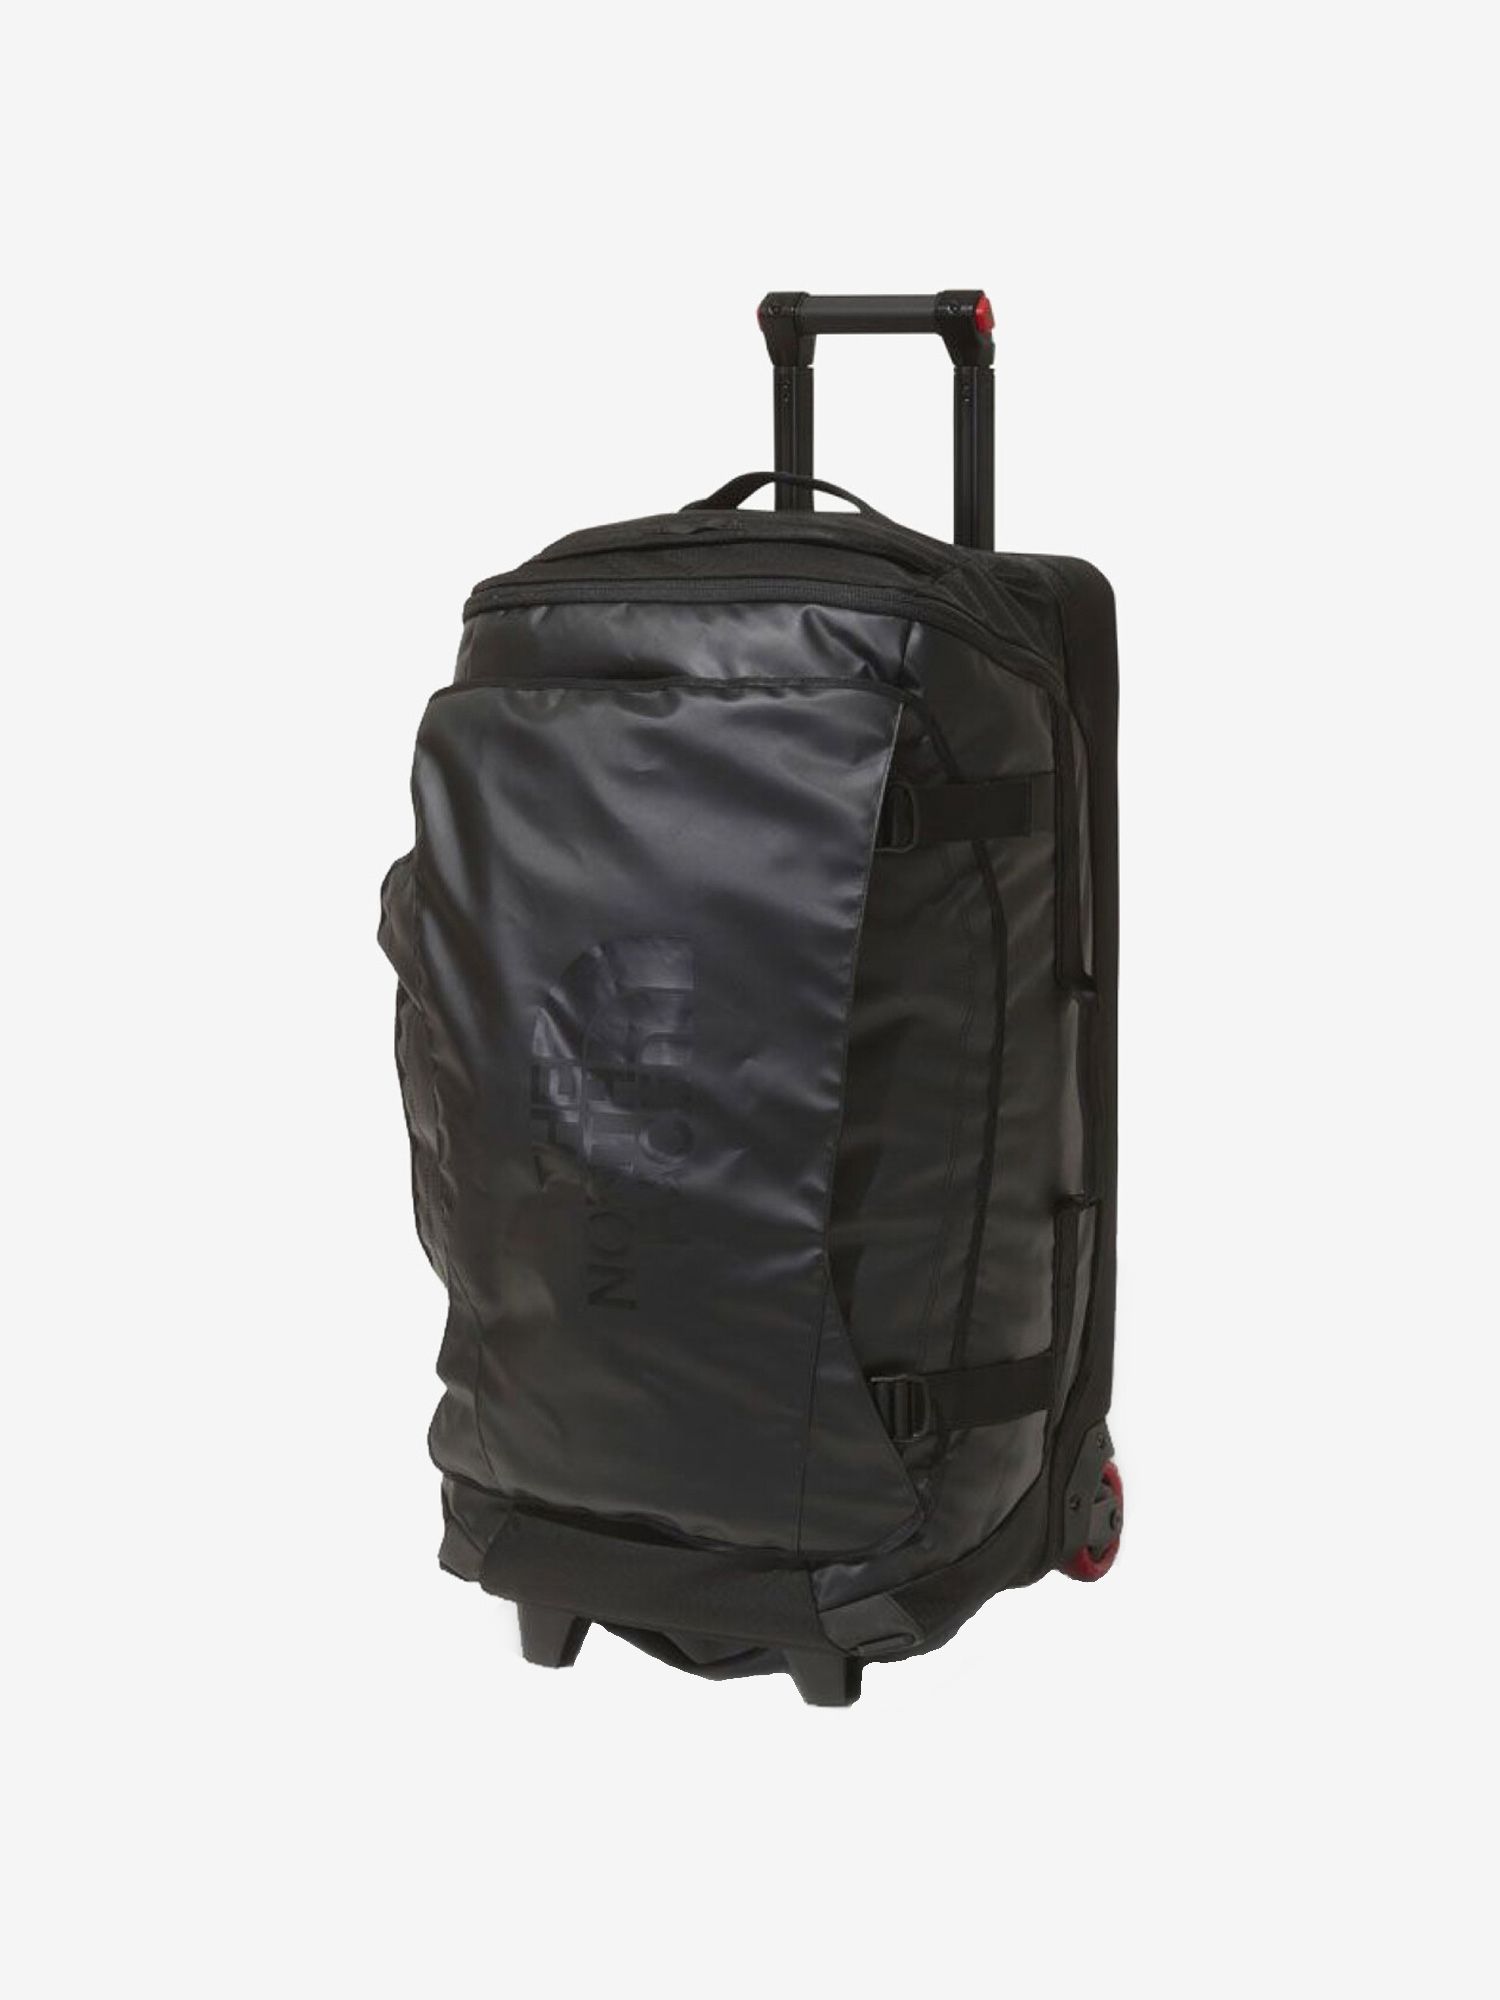 THE NORTH FACE ローリングサンダー30（80L）キャリーバッグ